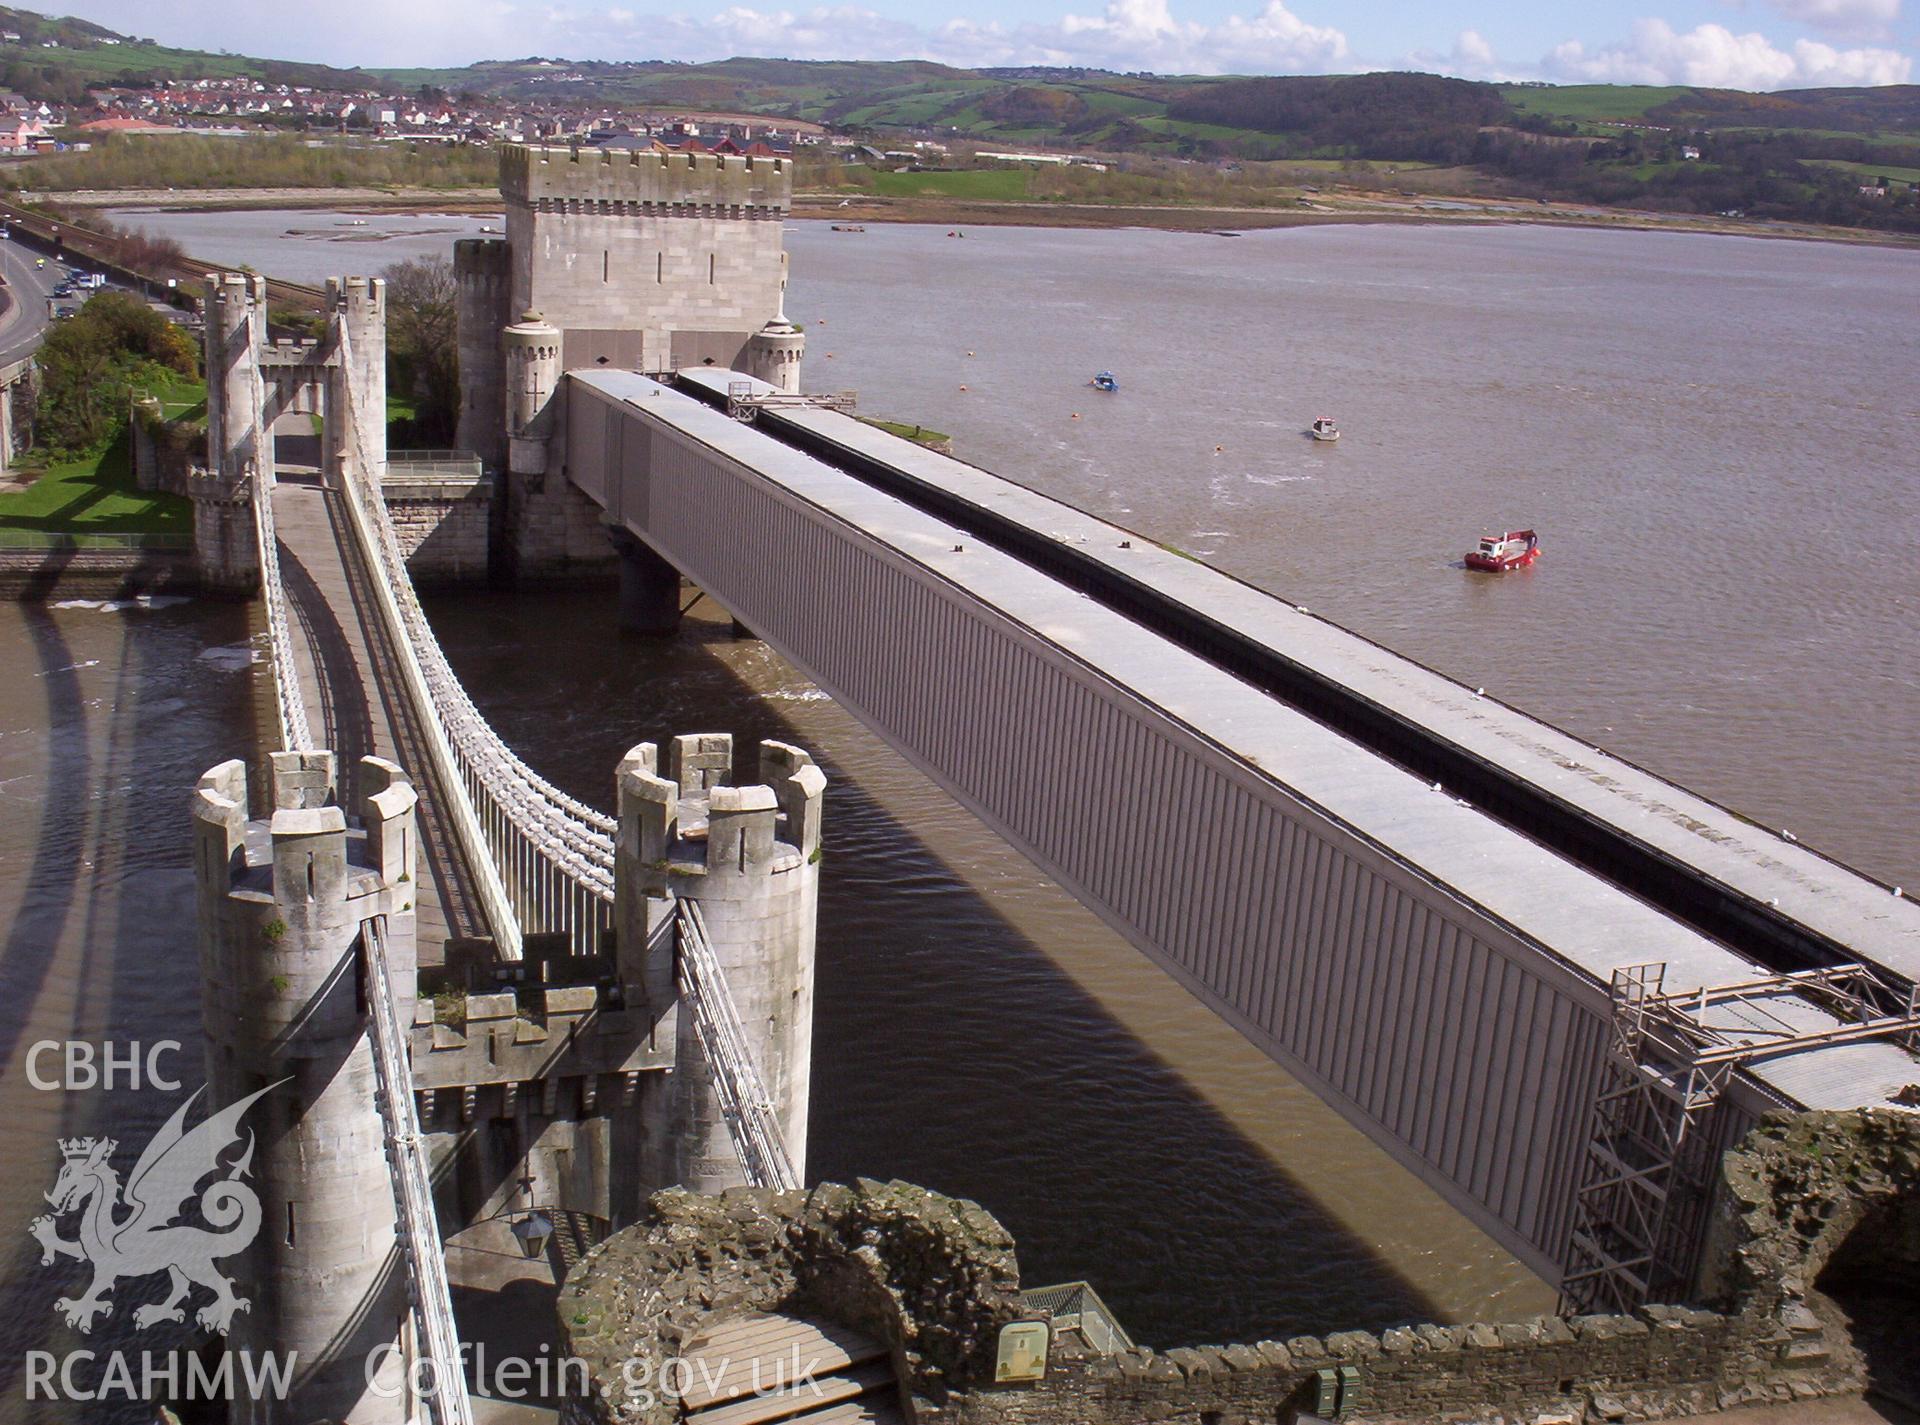 Two bridges and eastern bank of the River Conwy from top of the castle.